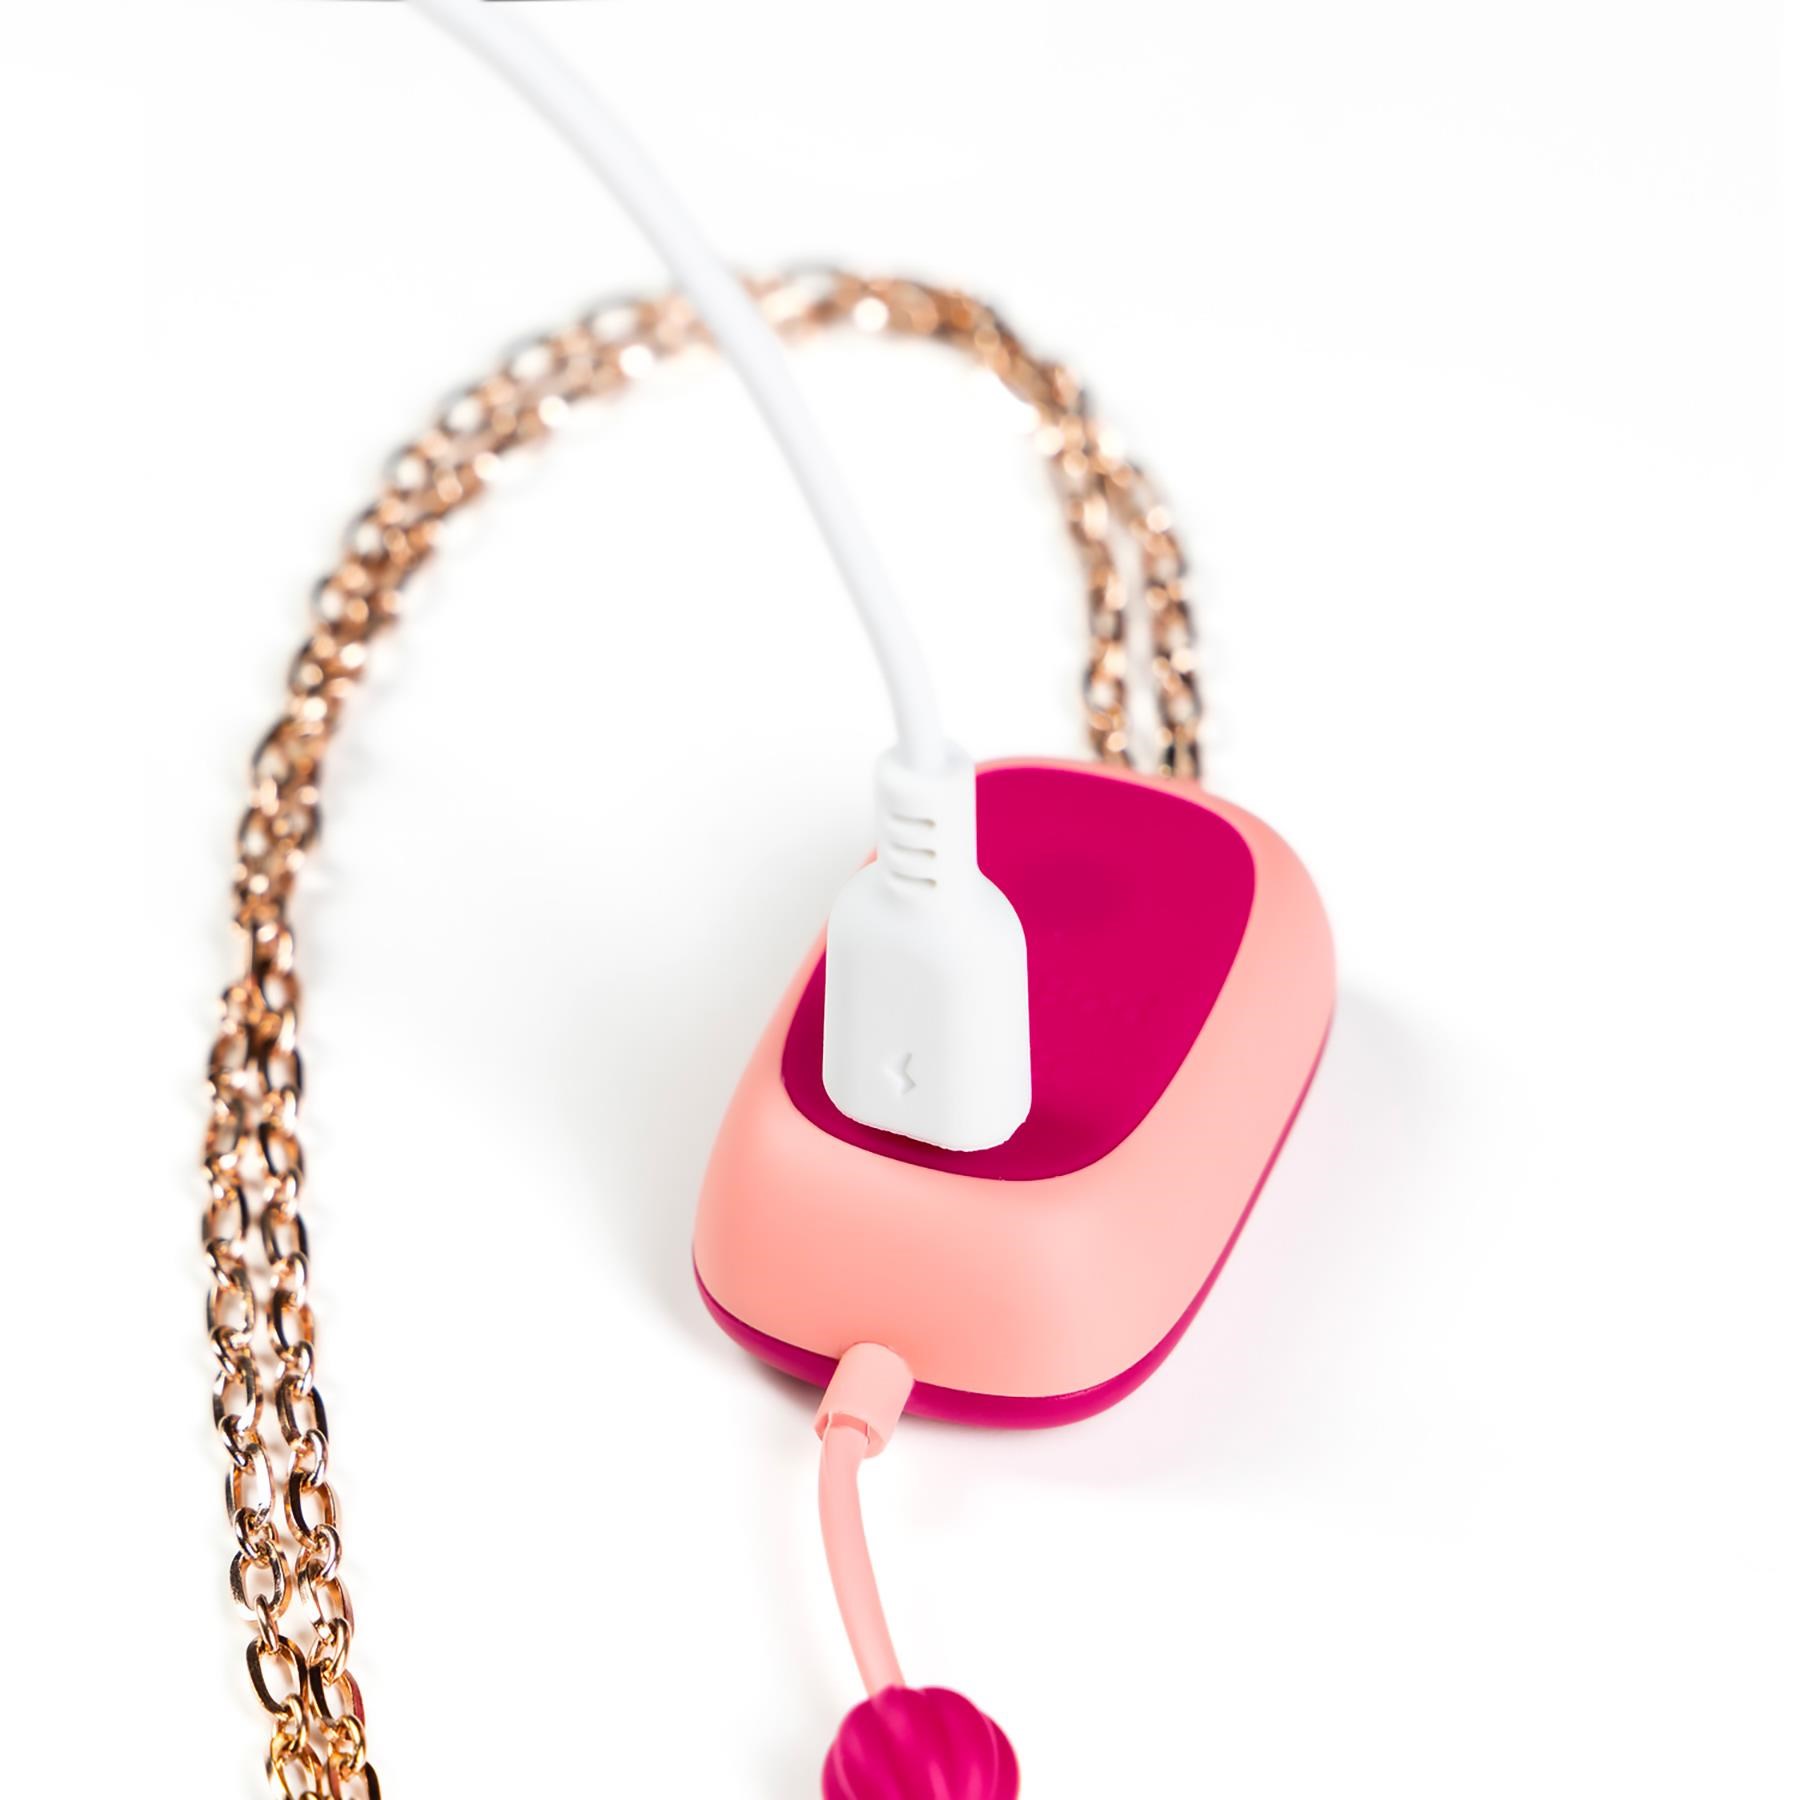 Lovelife Sphinx Vibrating Nipple Clamps - Showing Where Charging Cable is Placed